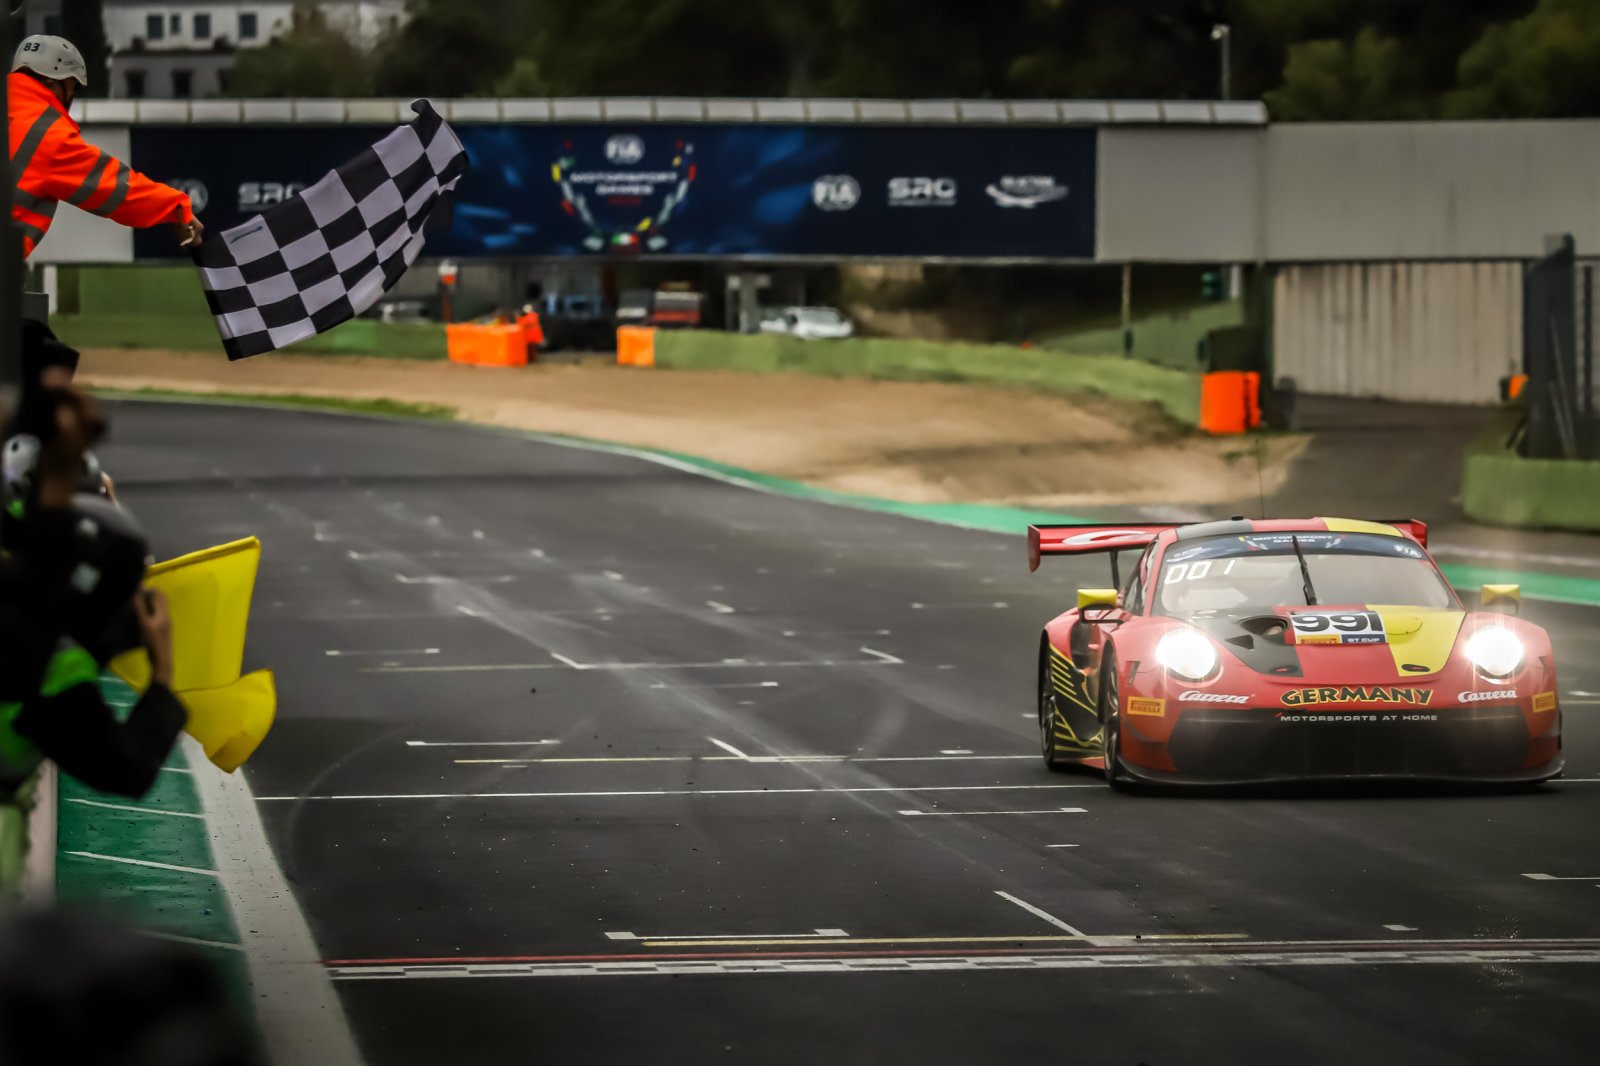 Team Germany victorious in opening GT Cup qualifying race